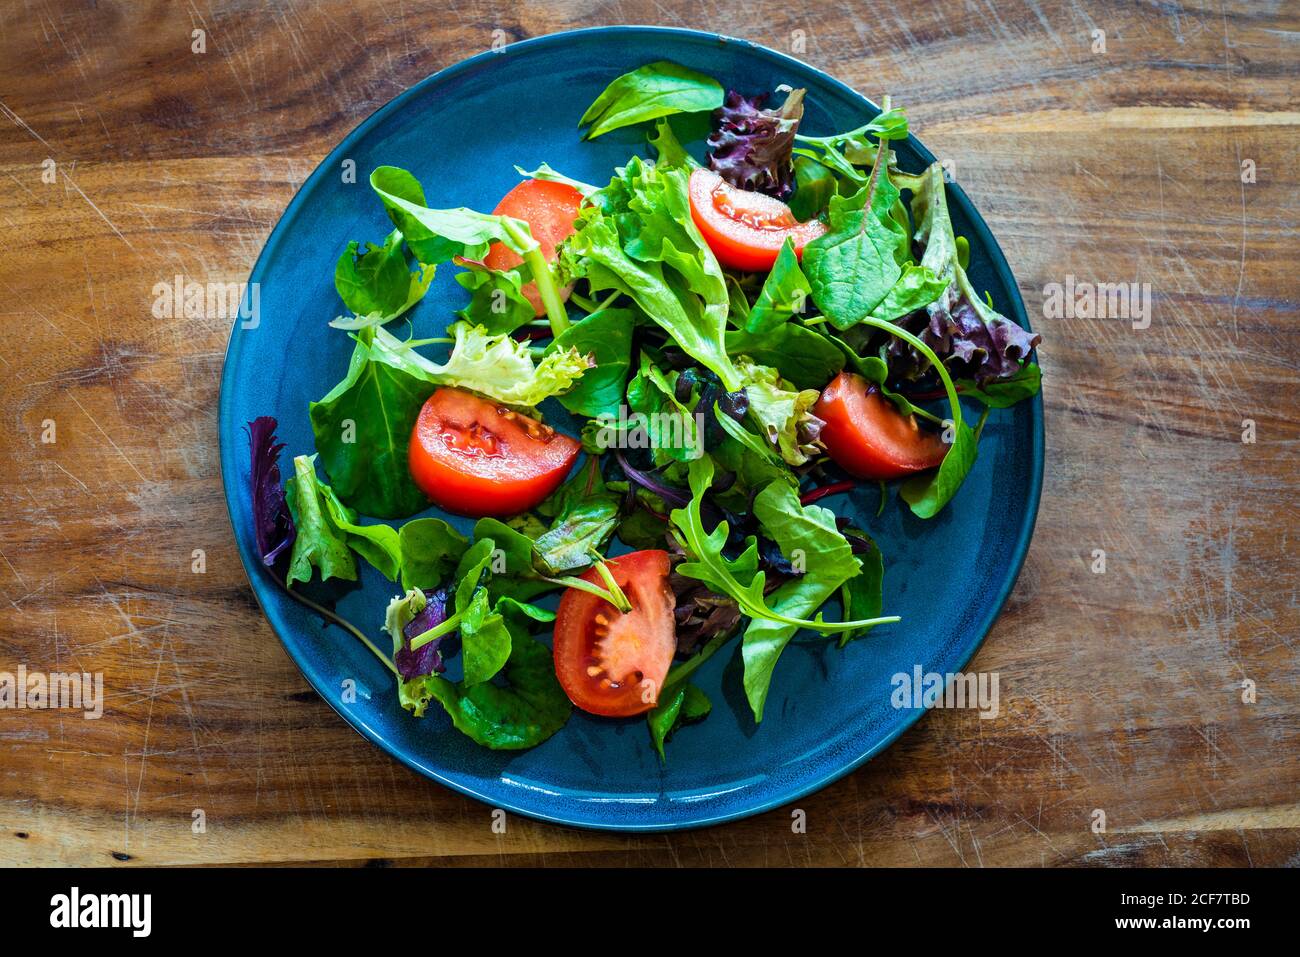 Green salad with tomatoes, flat lay Stock Photo